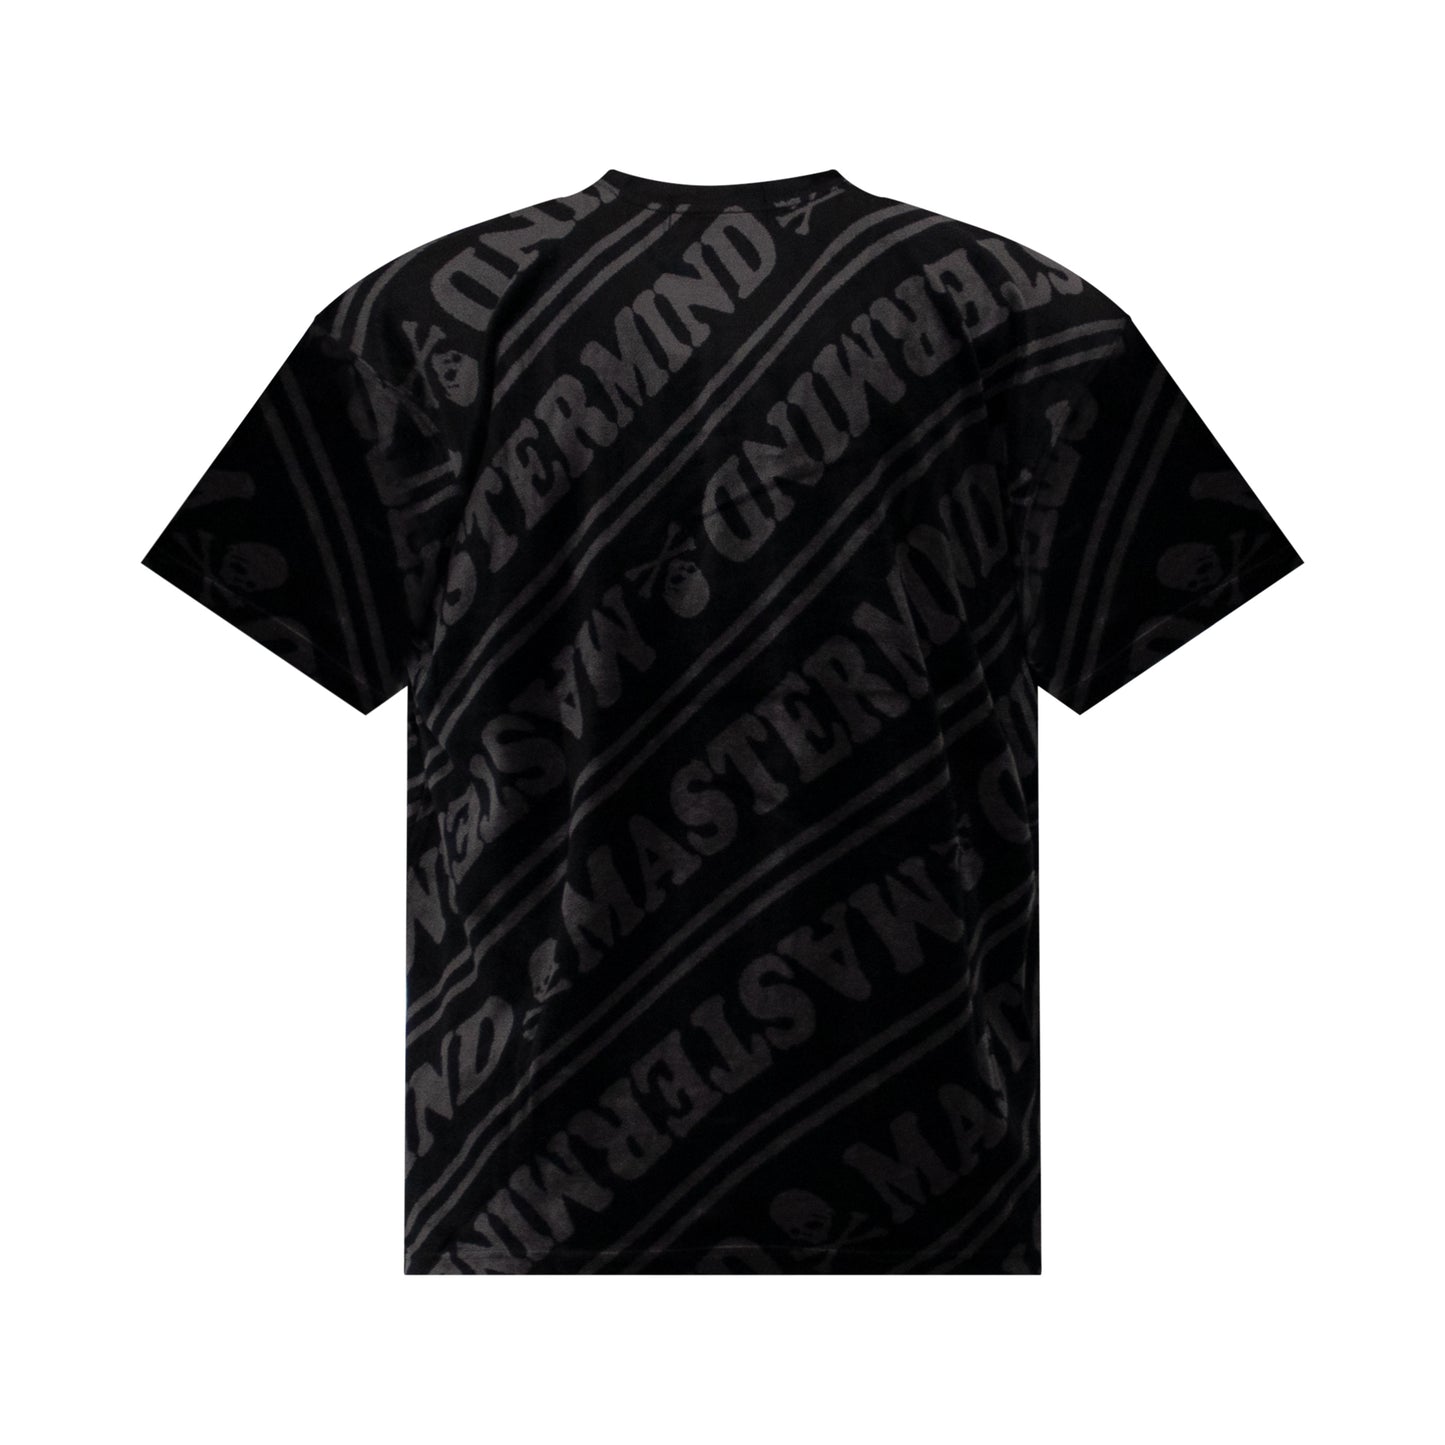 Mastermind World T-Shirt in Black/Charcoal